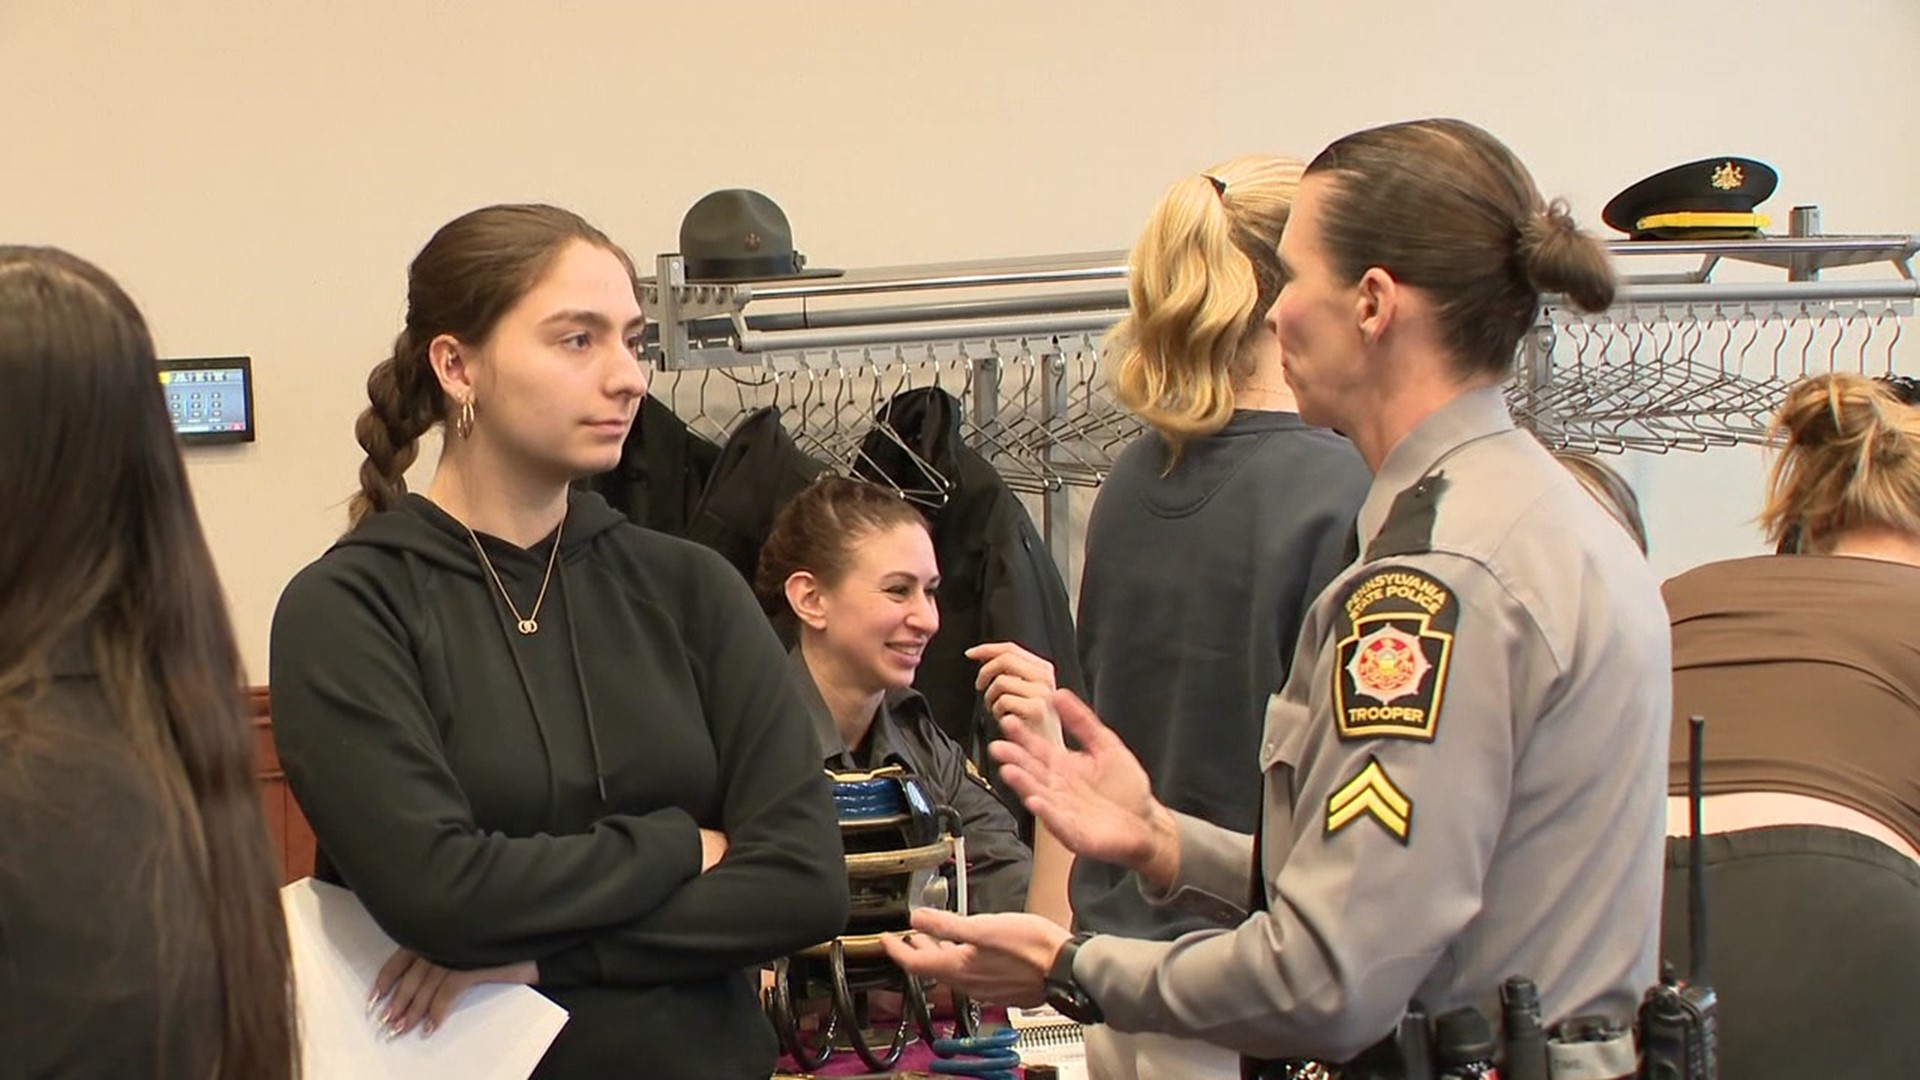 State troopers and officers from all over the region gathered at Bloomsburg University for the Female Law Enforcement Expo.